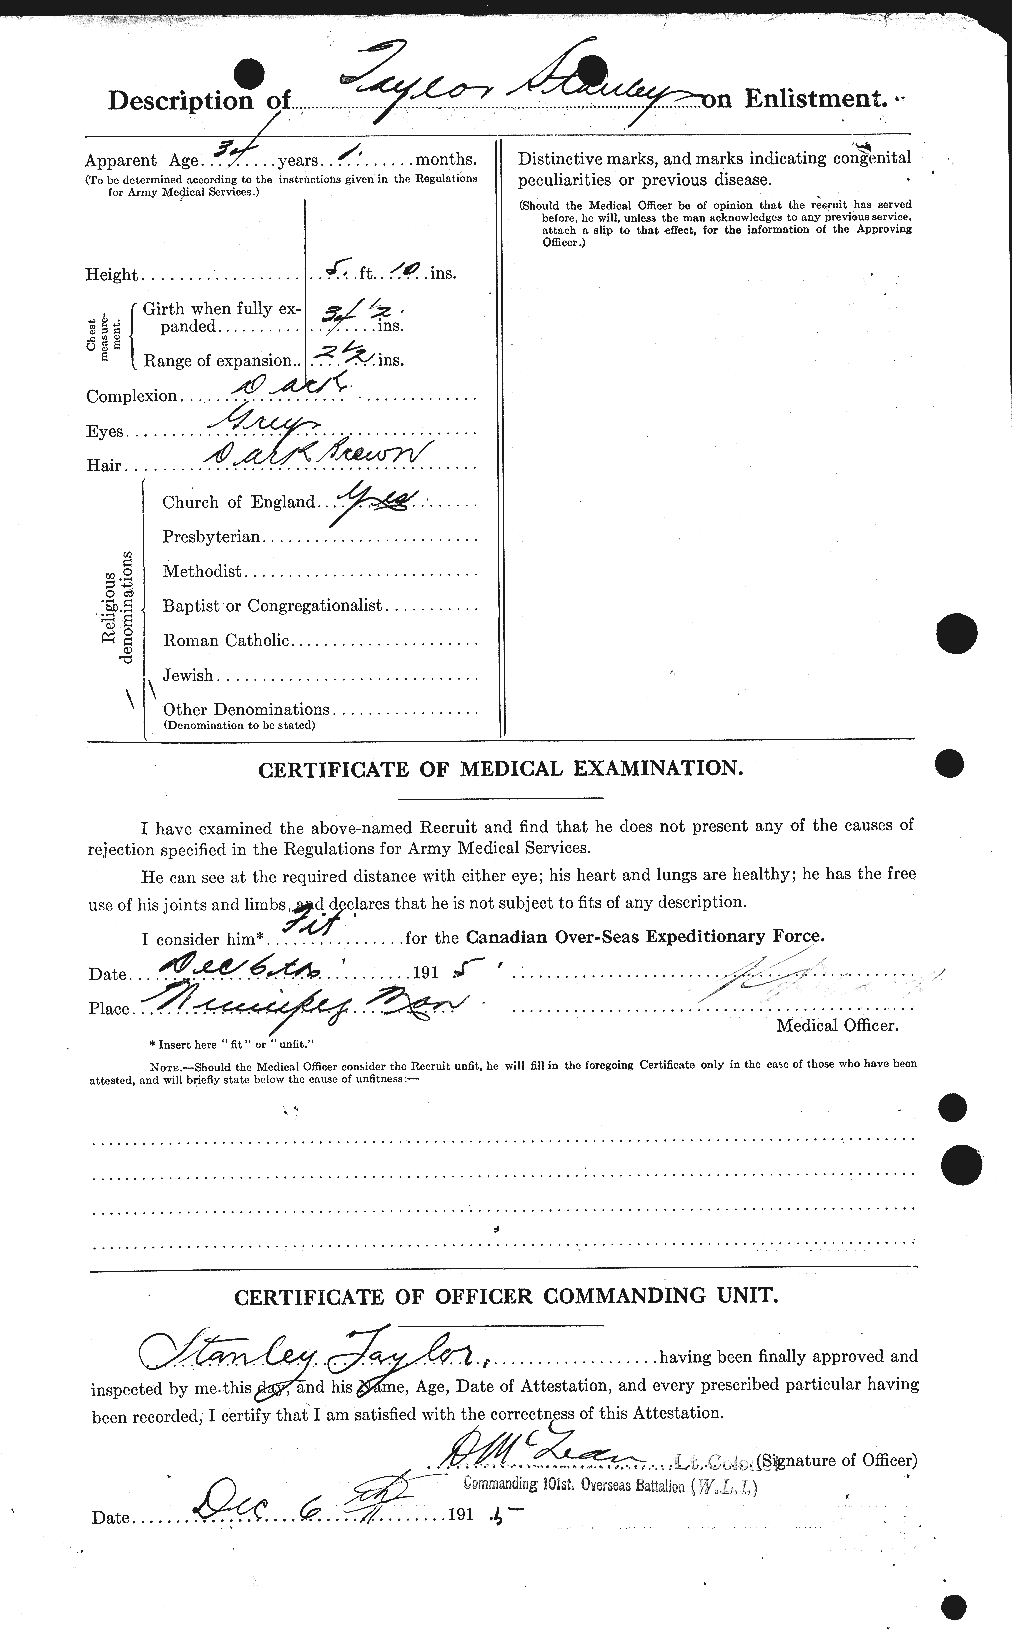 Personnel Records of the First World War - CEF 627910b